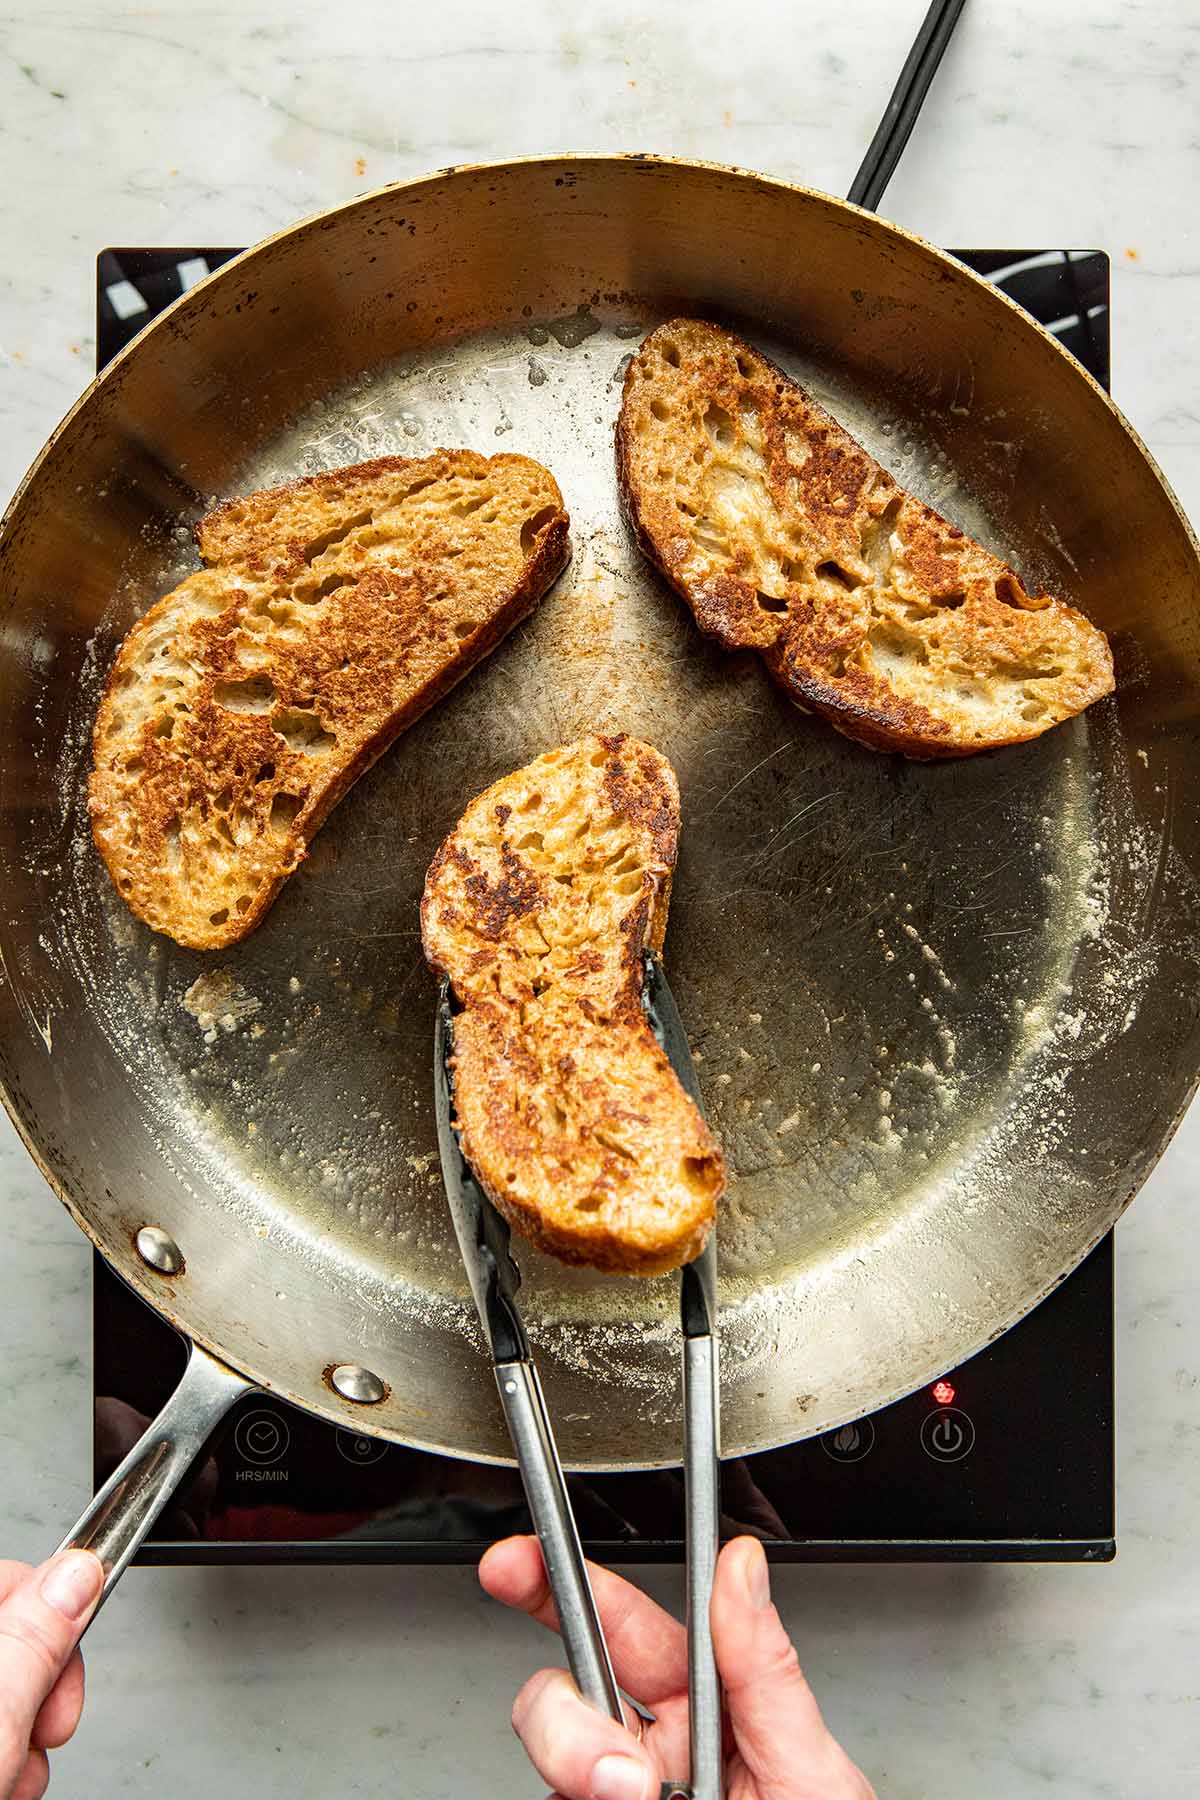 A hand using a pair of tongs to flip bread over in a frying pan.